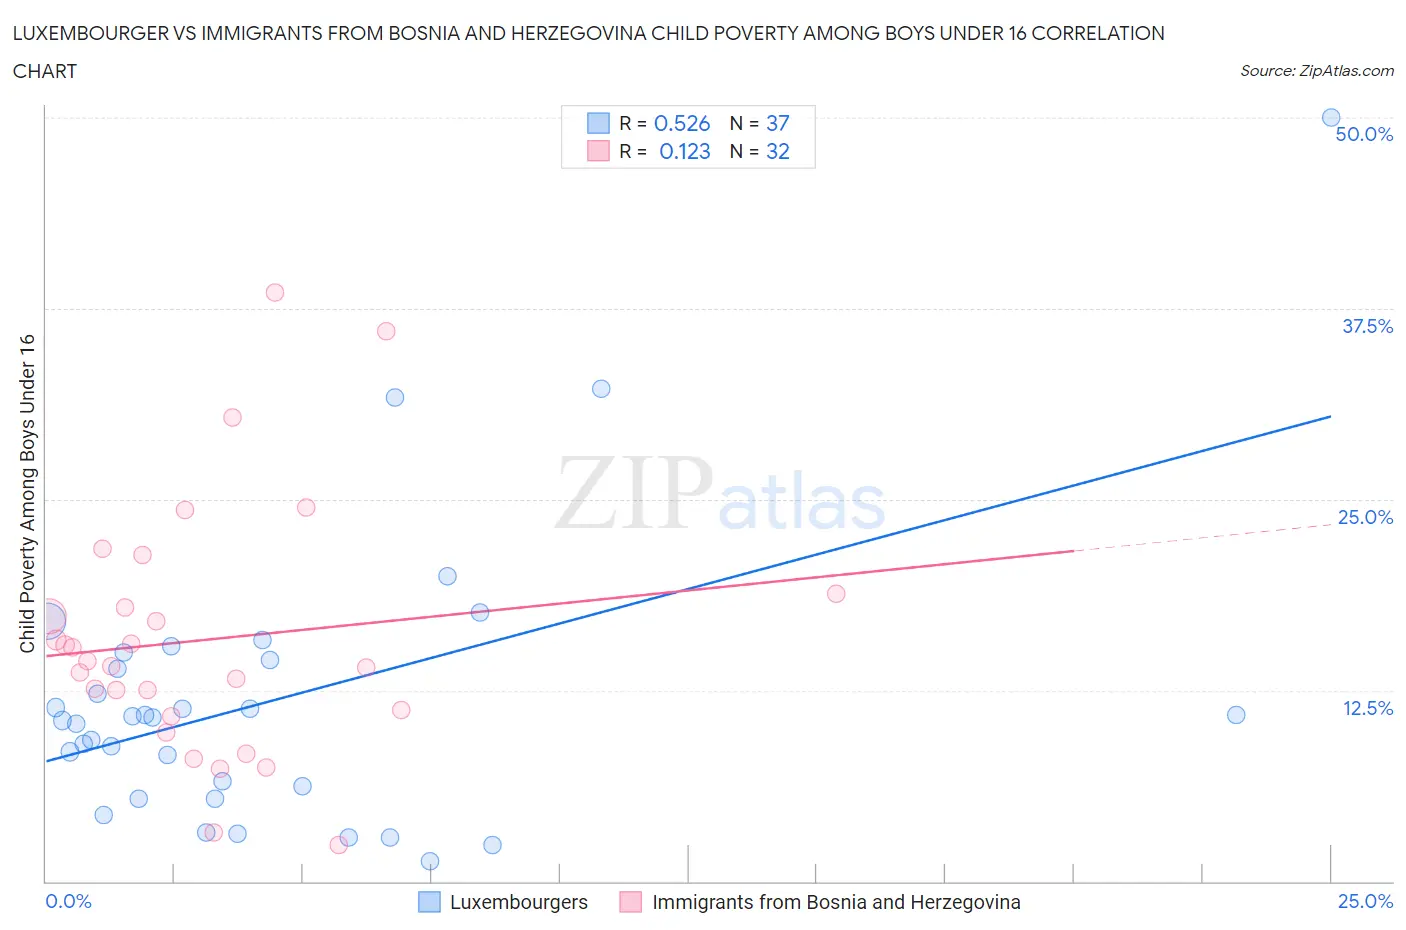 Luxembourger vs Immigrants from Bosnia and Herzegovina Child Poverty Among Boys Under 16